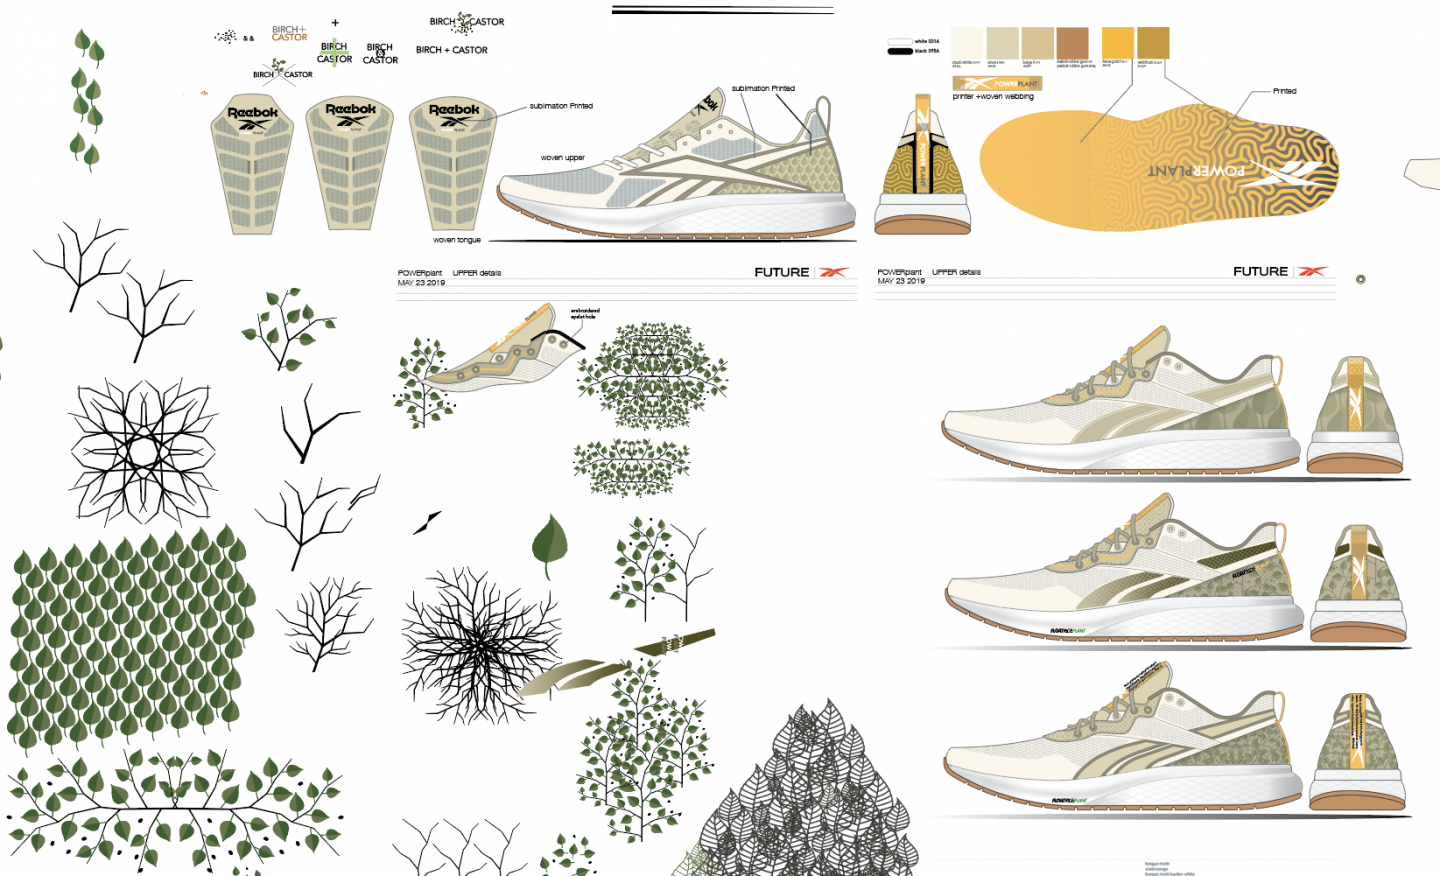 Szkic projektanta Ricardo Vestuti (źr.:https://www.gameplan-a.com/2020/09/why-you-need-to-park-your-assumptions-to-create-plant-based-shoes/). 